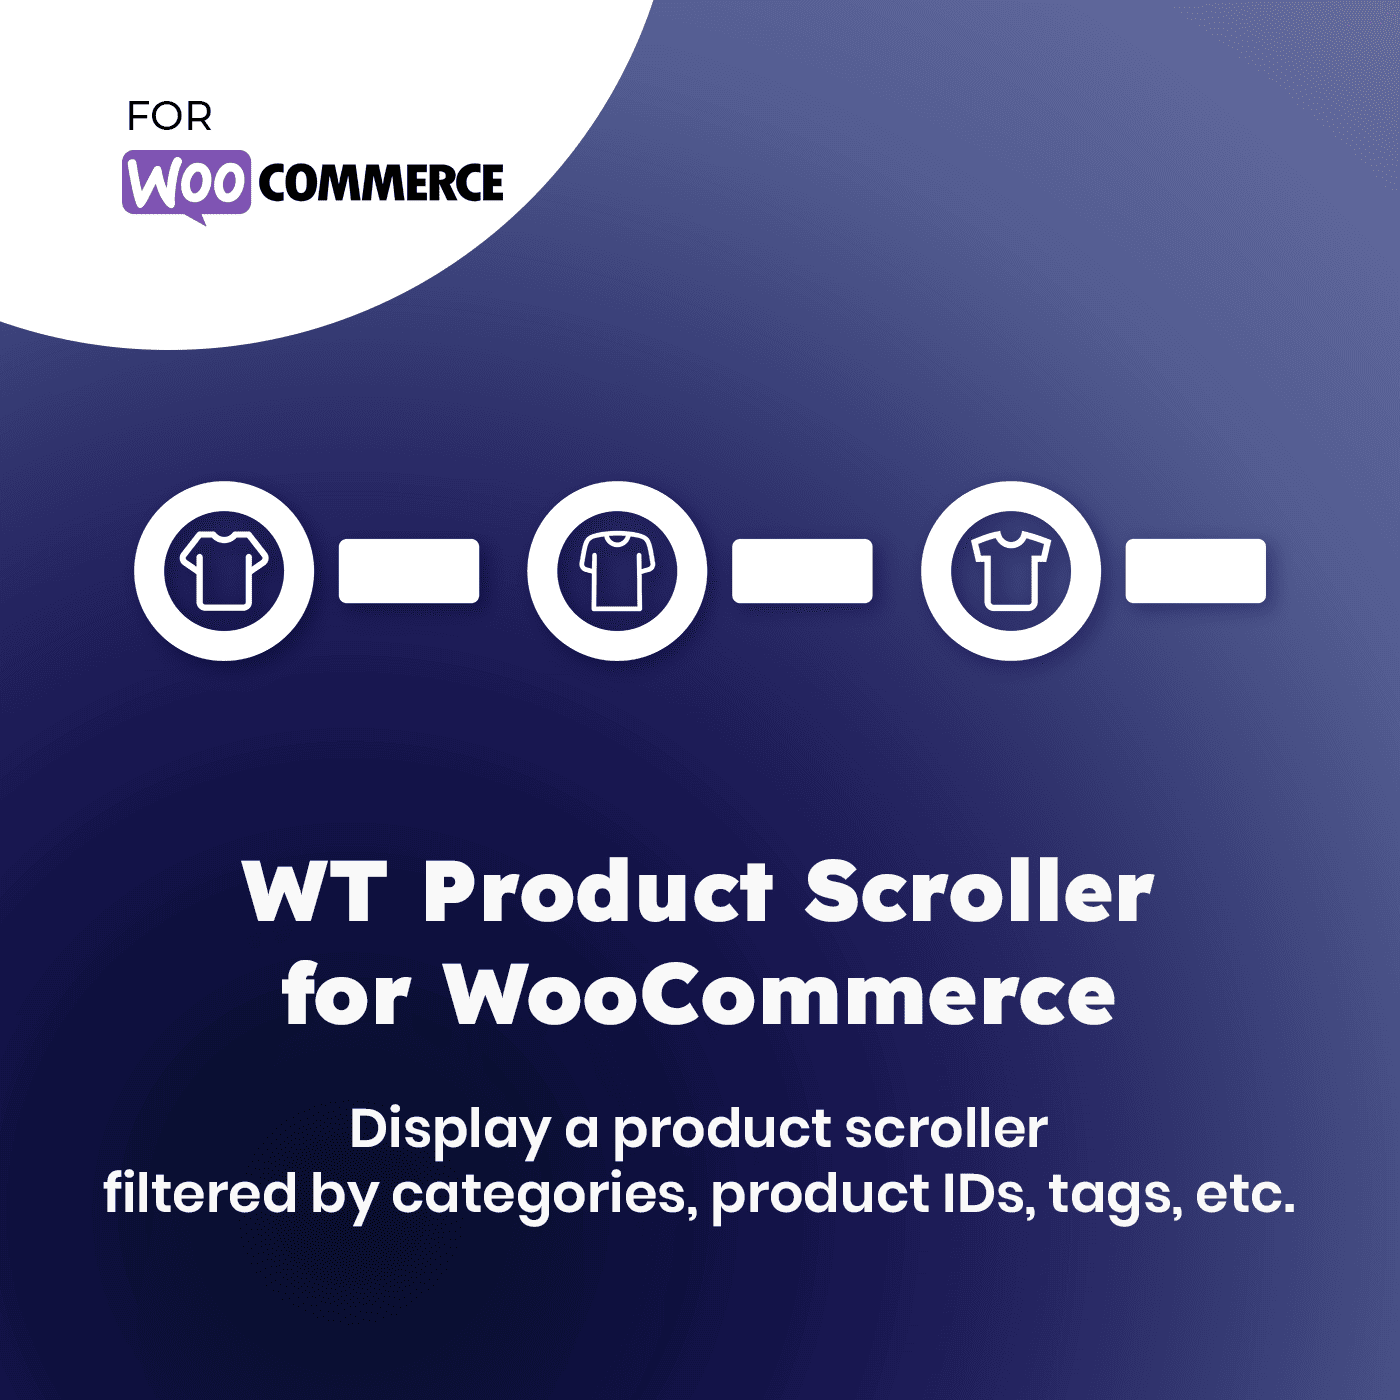 WT Product Scroller for WooCommerce - WordPress Plugin for WooCommerce